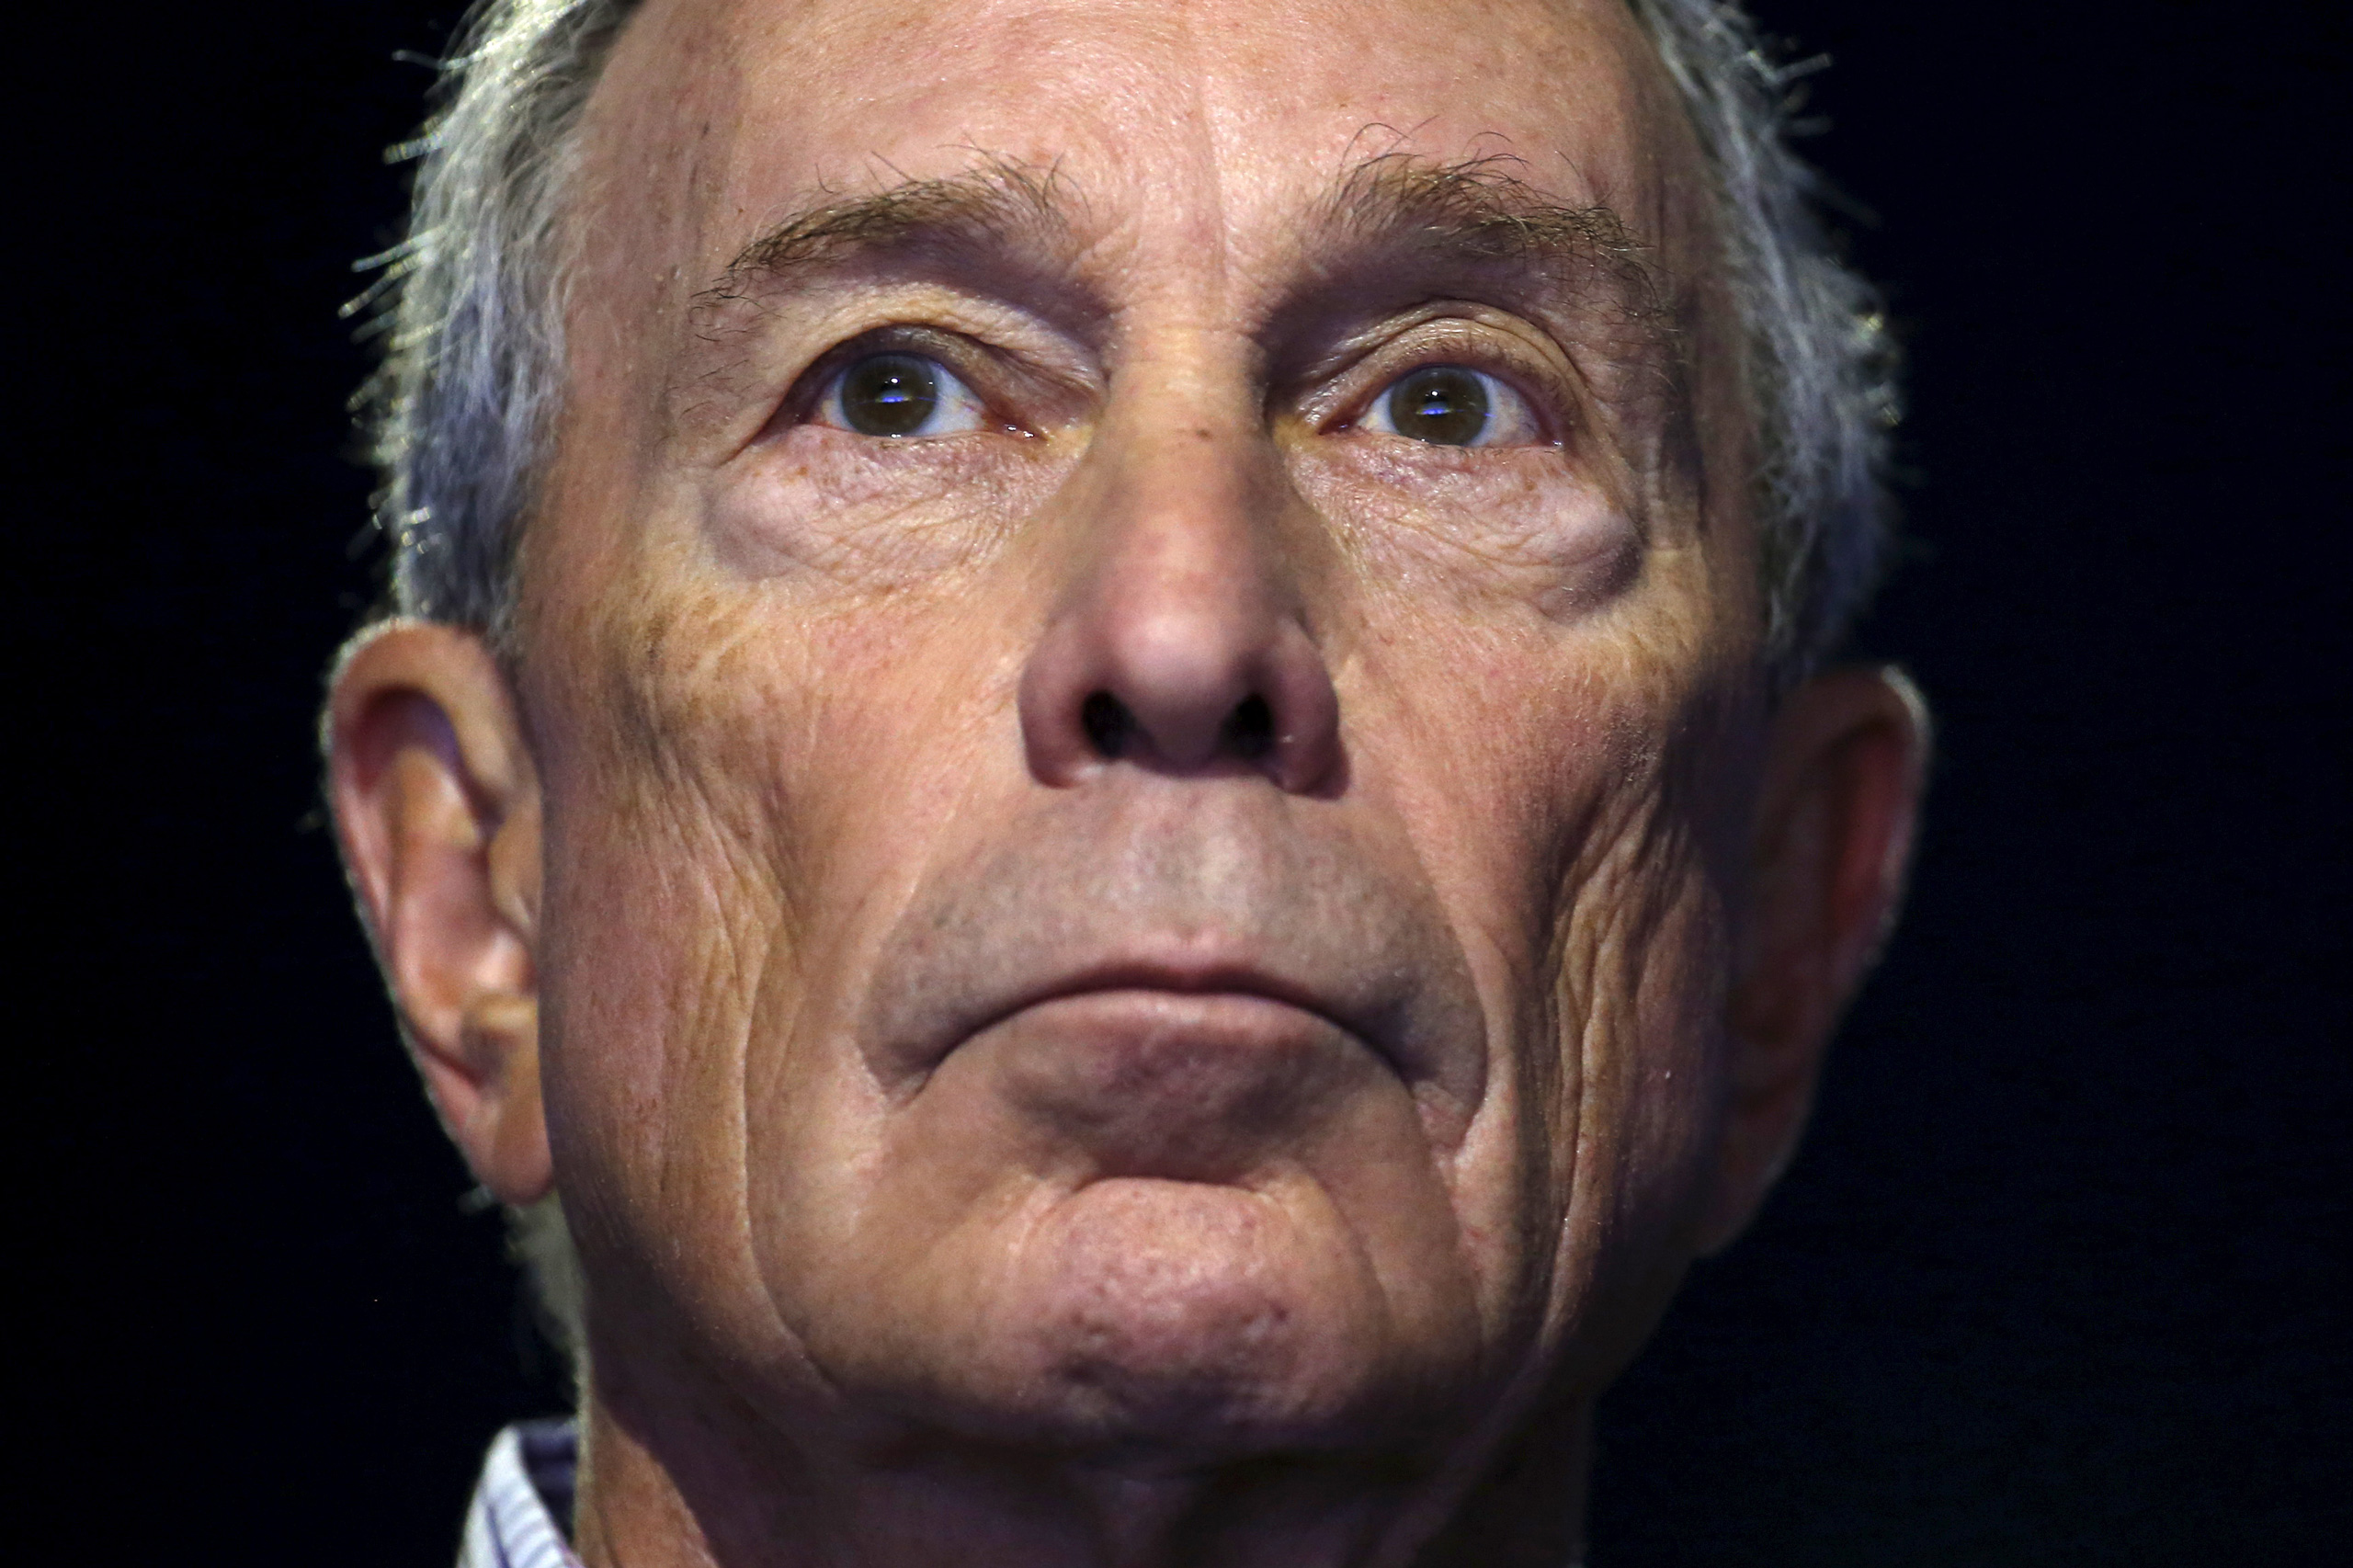 Former New York City Mayor Michael Bloomberg attends a meeting during the World Climate Change Conference 2015 (COP21) at Le Bourget, France, on Dec. 5, 2015 (Stephane Mahe—Reuters)